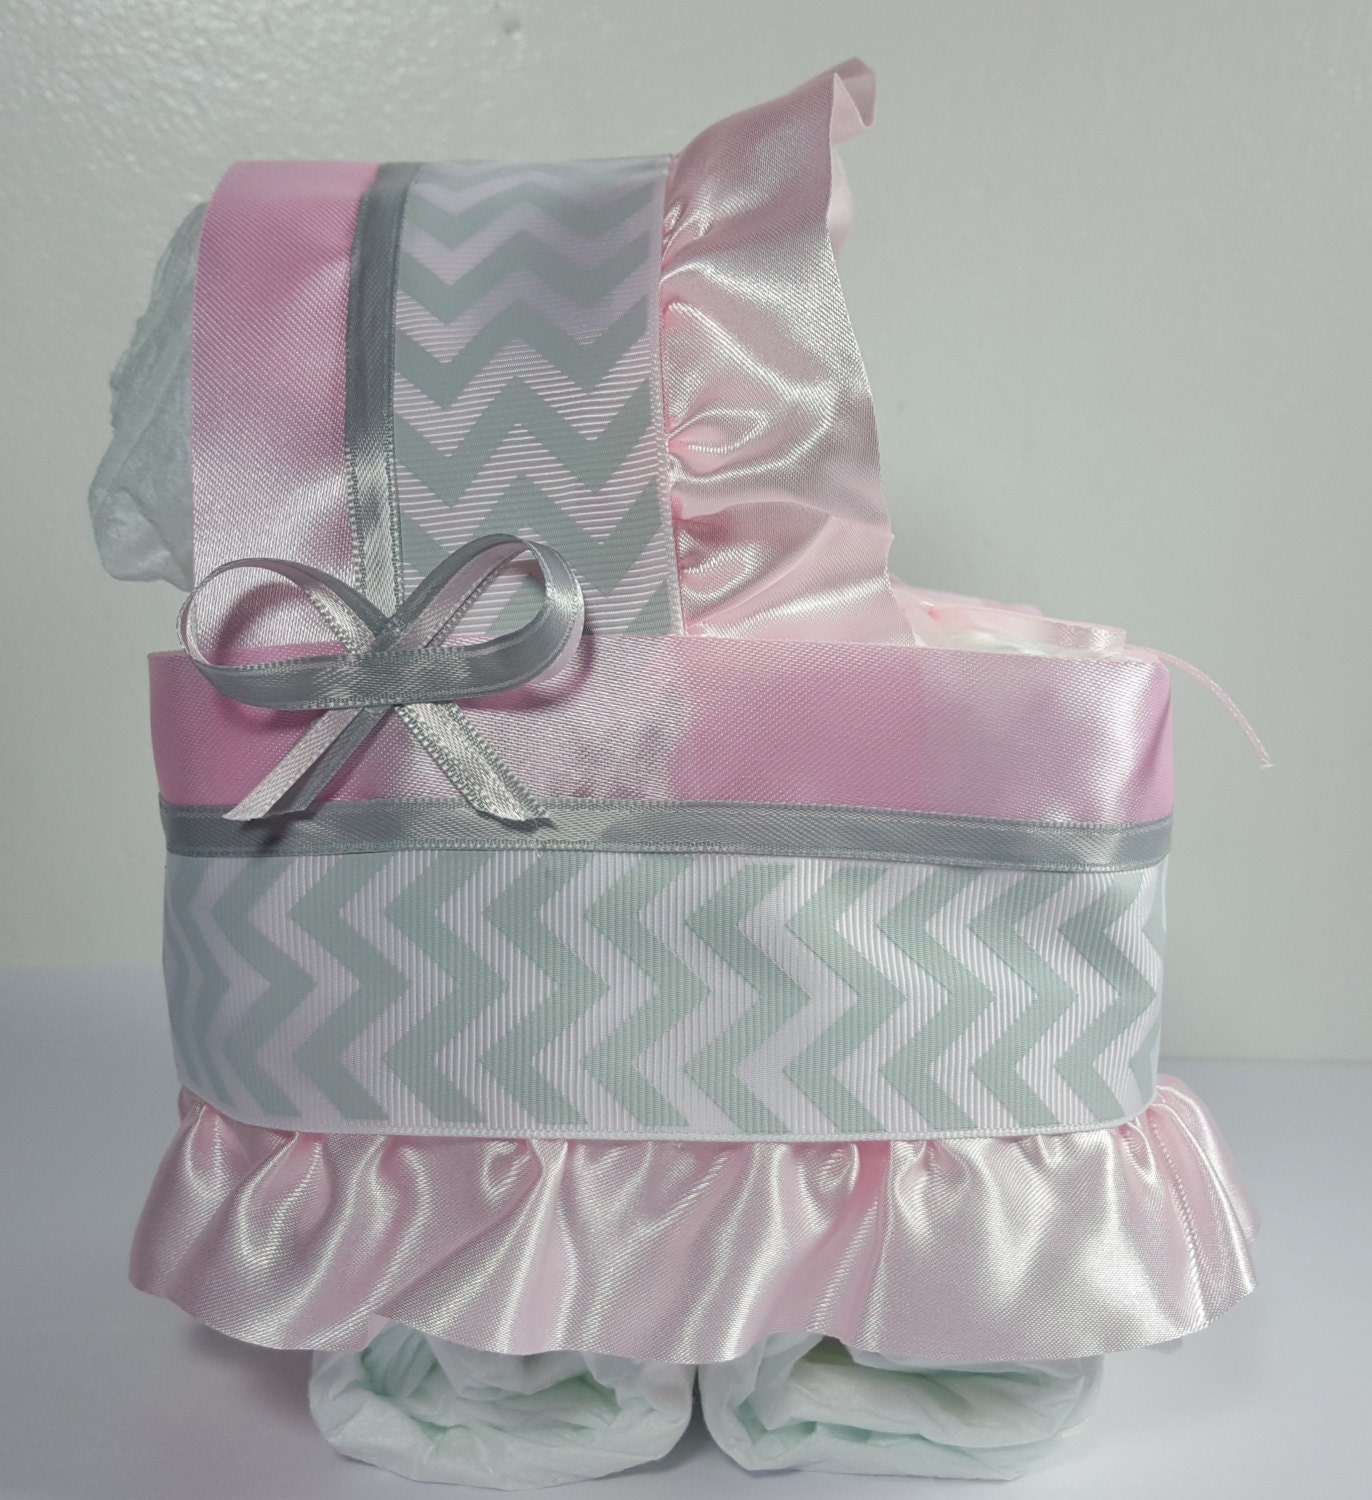 Diaper Cake Bassinet Carriage Girl Baby Shower Gift Pink and